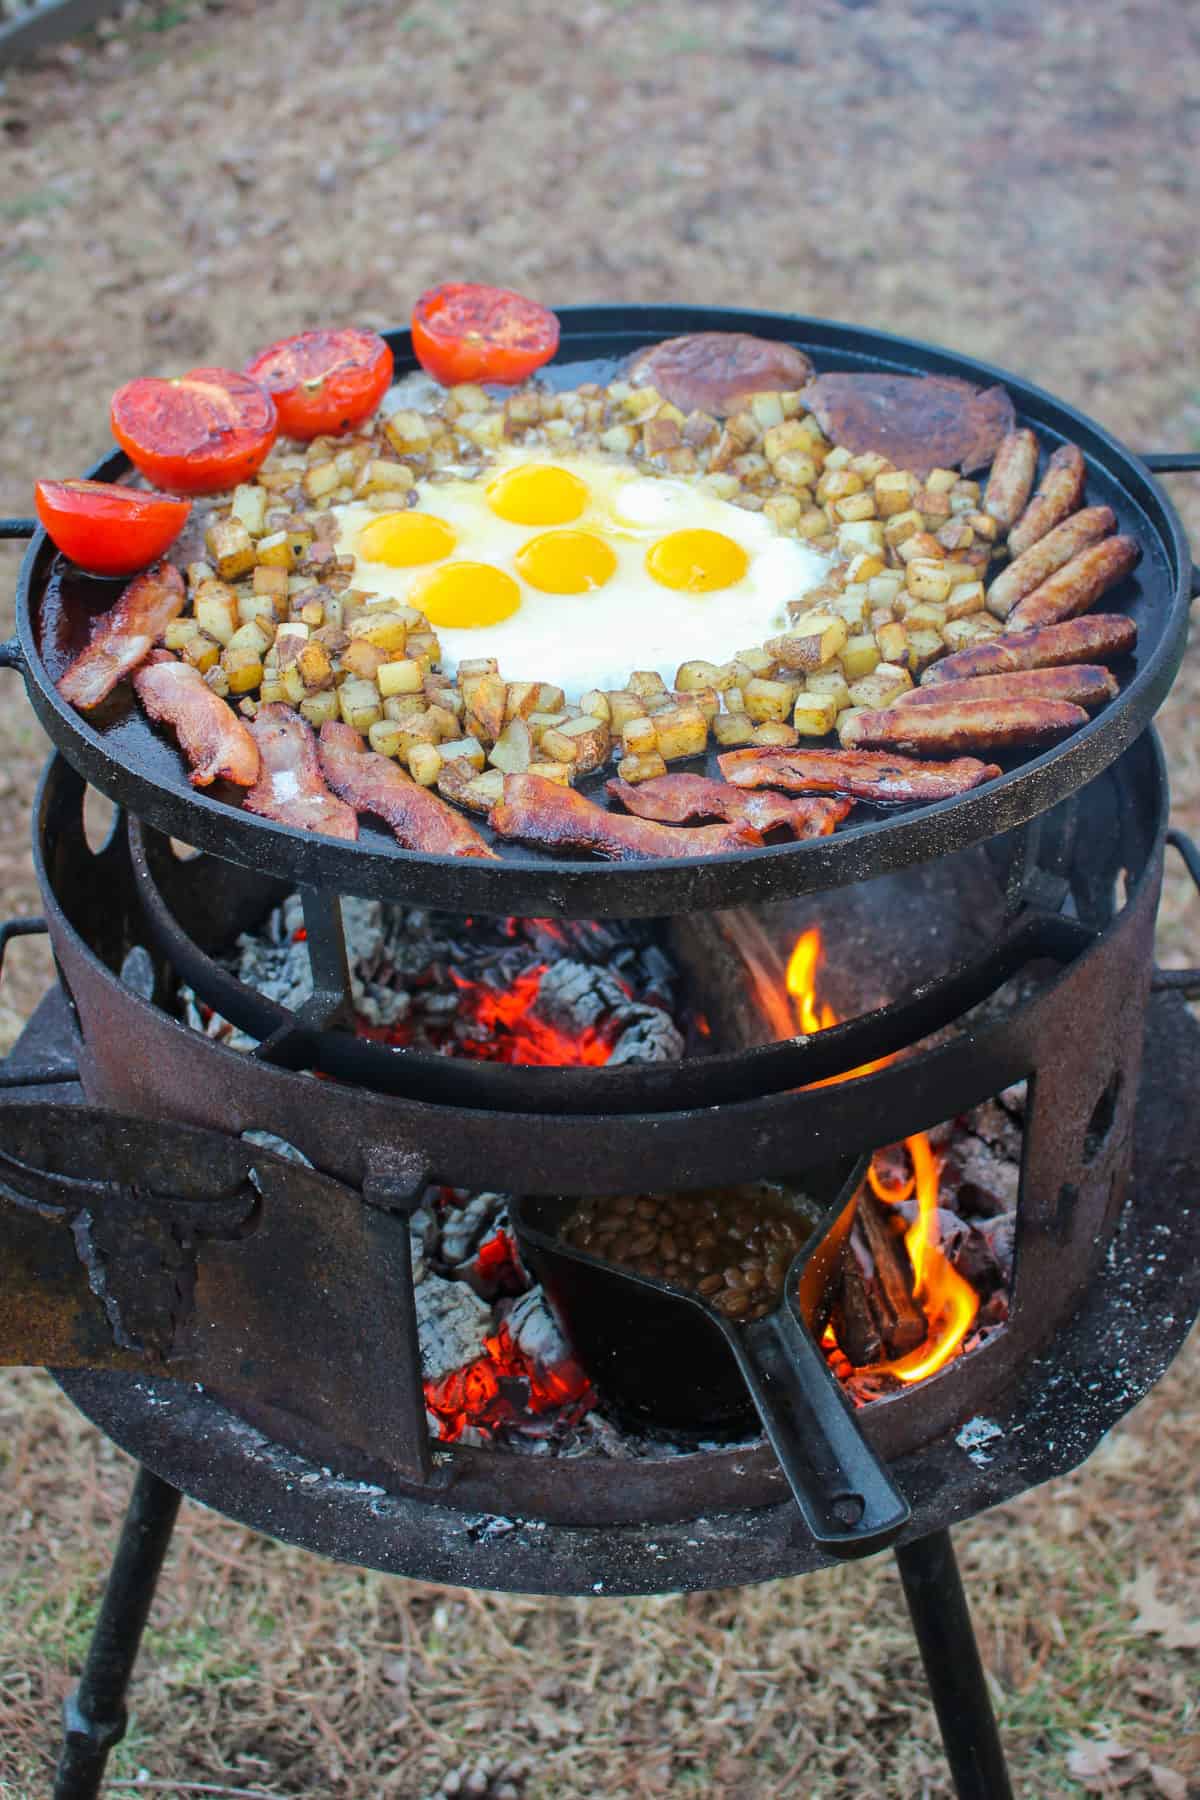 Breakfast Fry Up almost finished with the baked beans cooking next to the coals. 